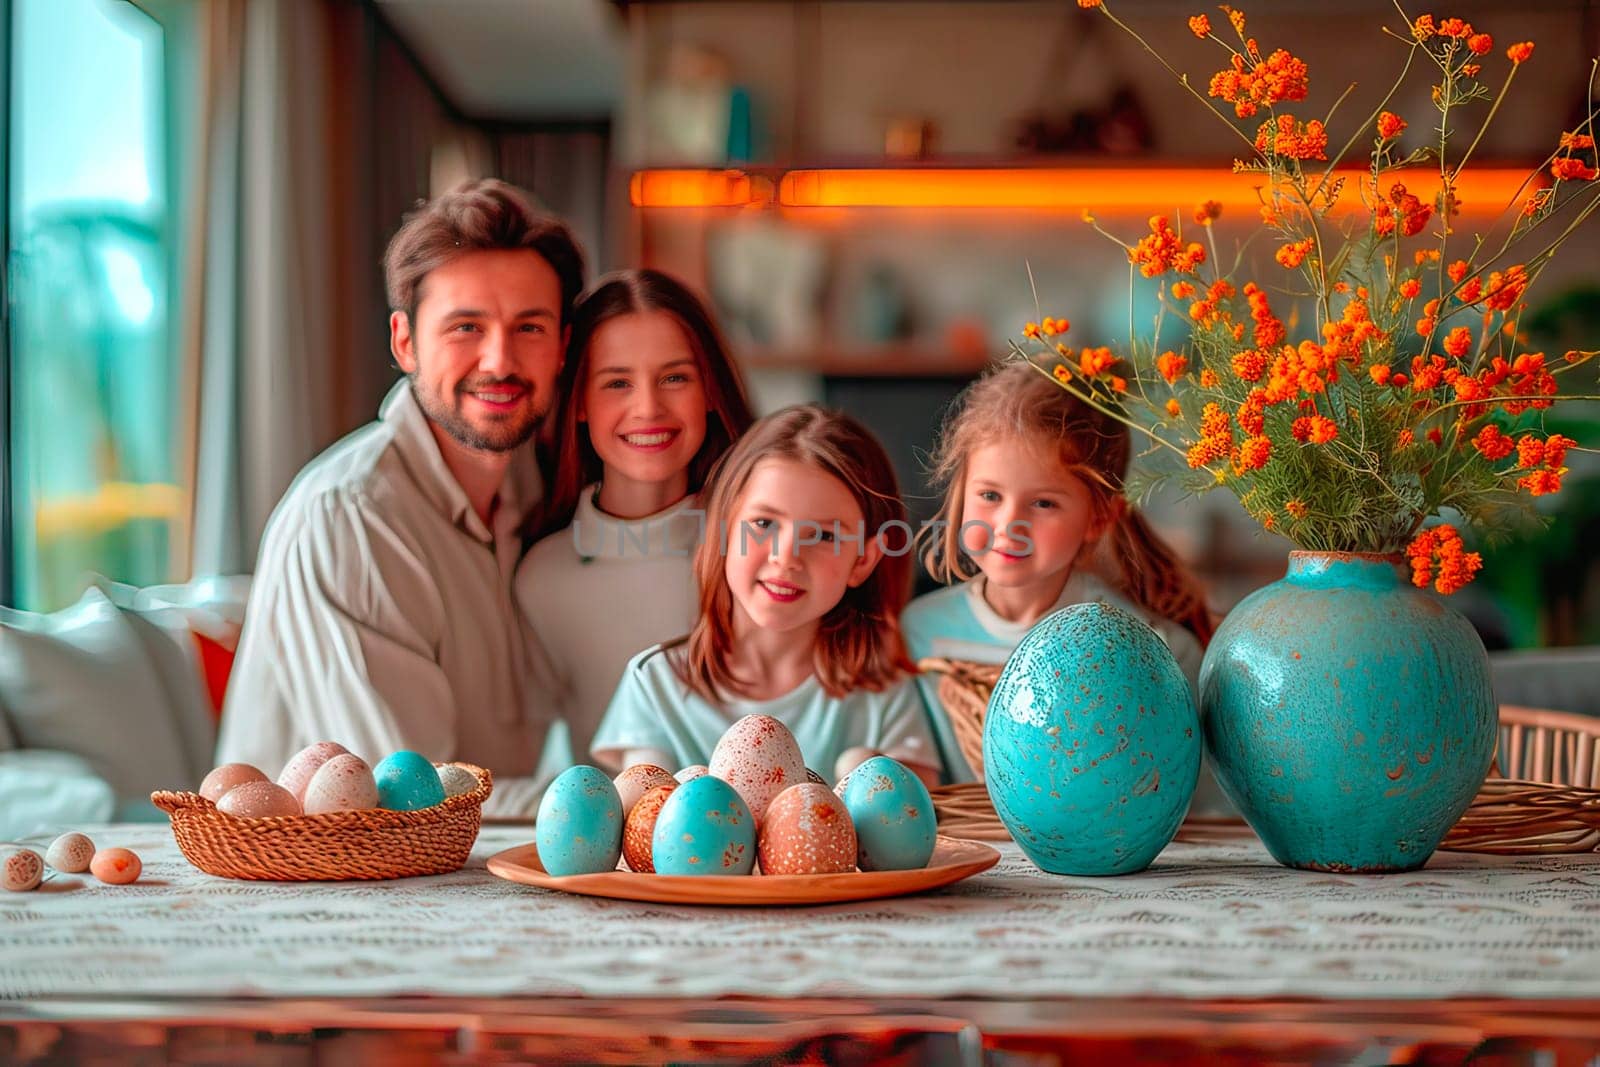 Spending Easter with the family in a house decorated with Easter eggs. by fotodrobik